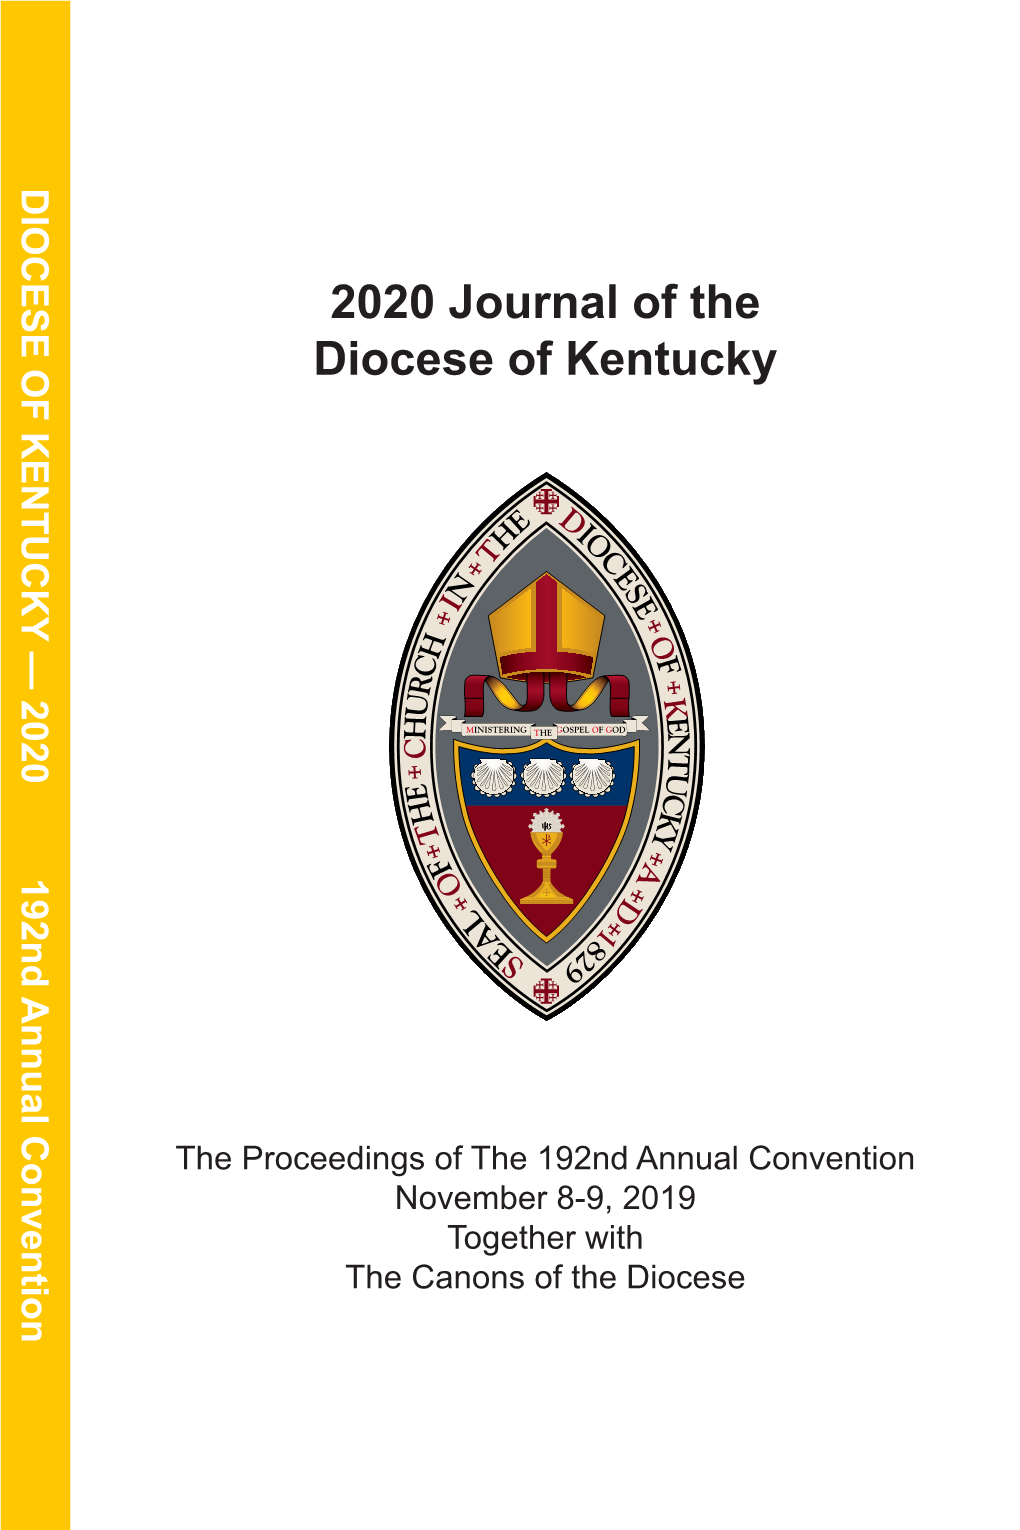 2020 Journal of the Diocese of Kentucky